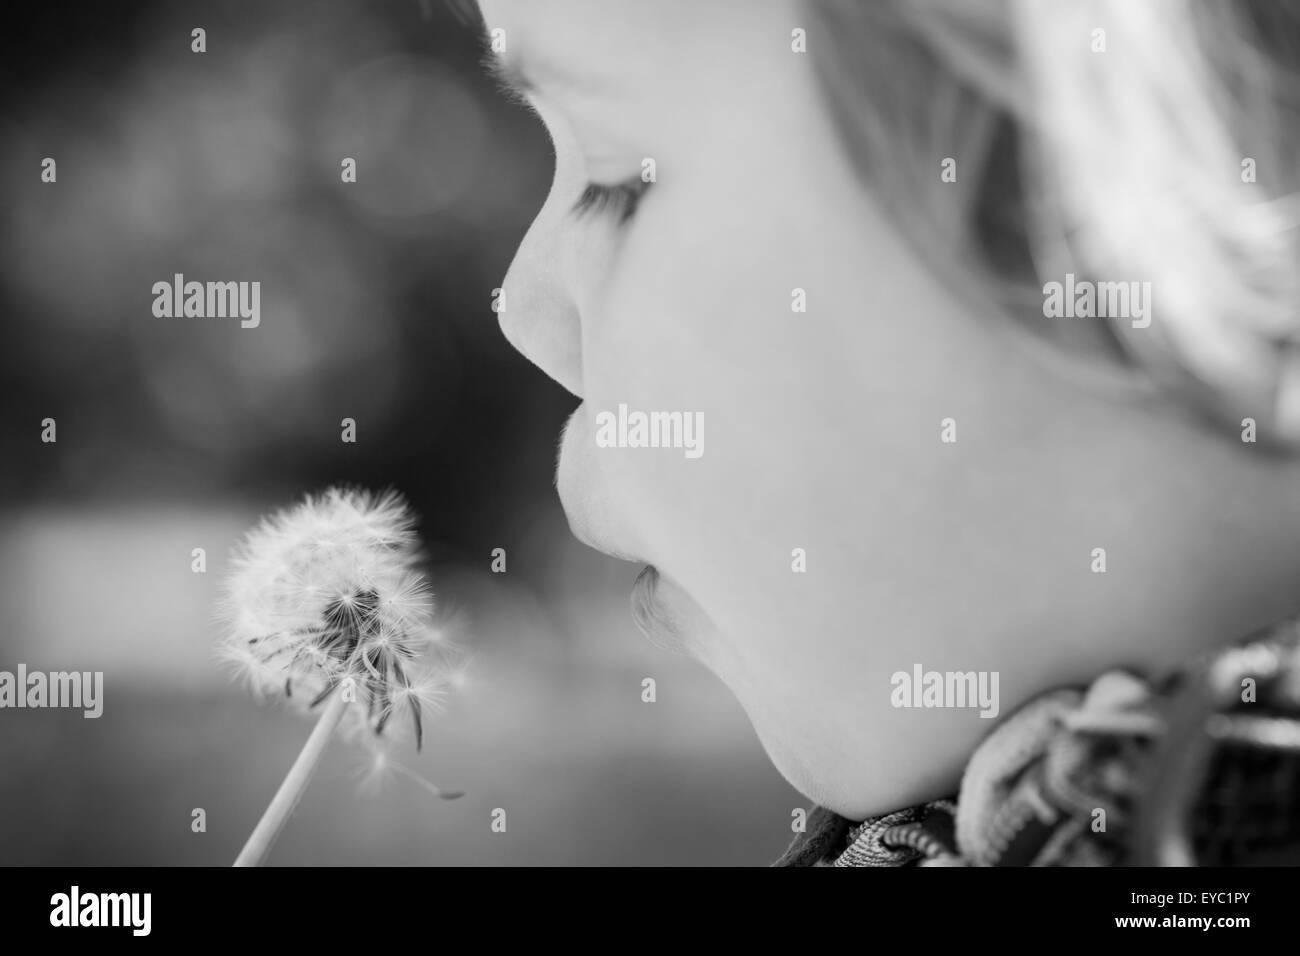 Caucasian blond baby girl and dandelion flower in a park, monochrome photo with selective focus Stock Photo